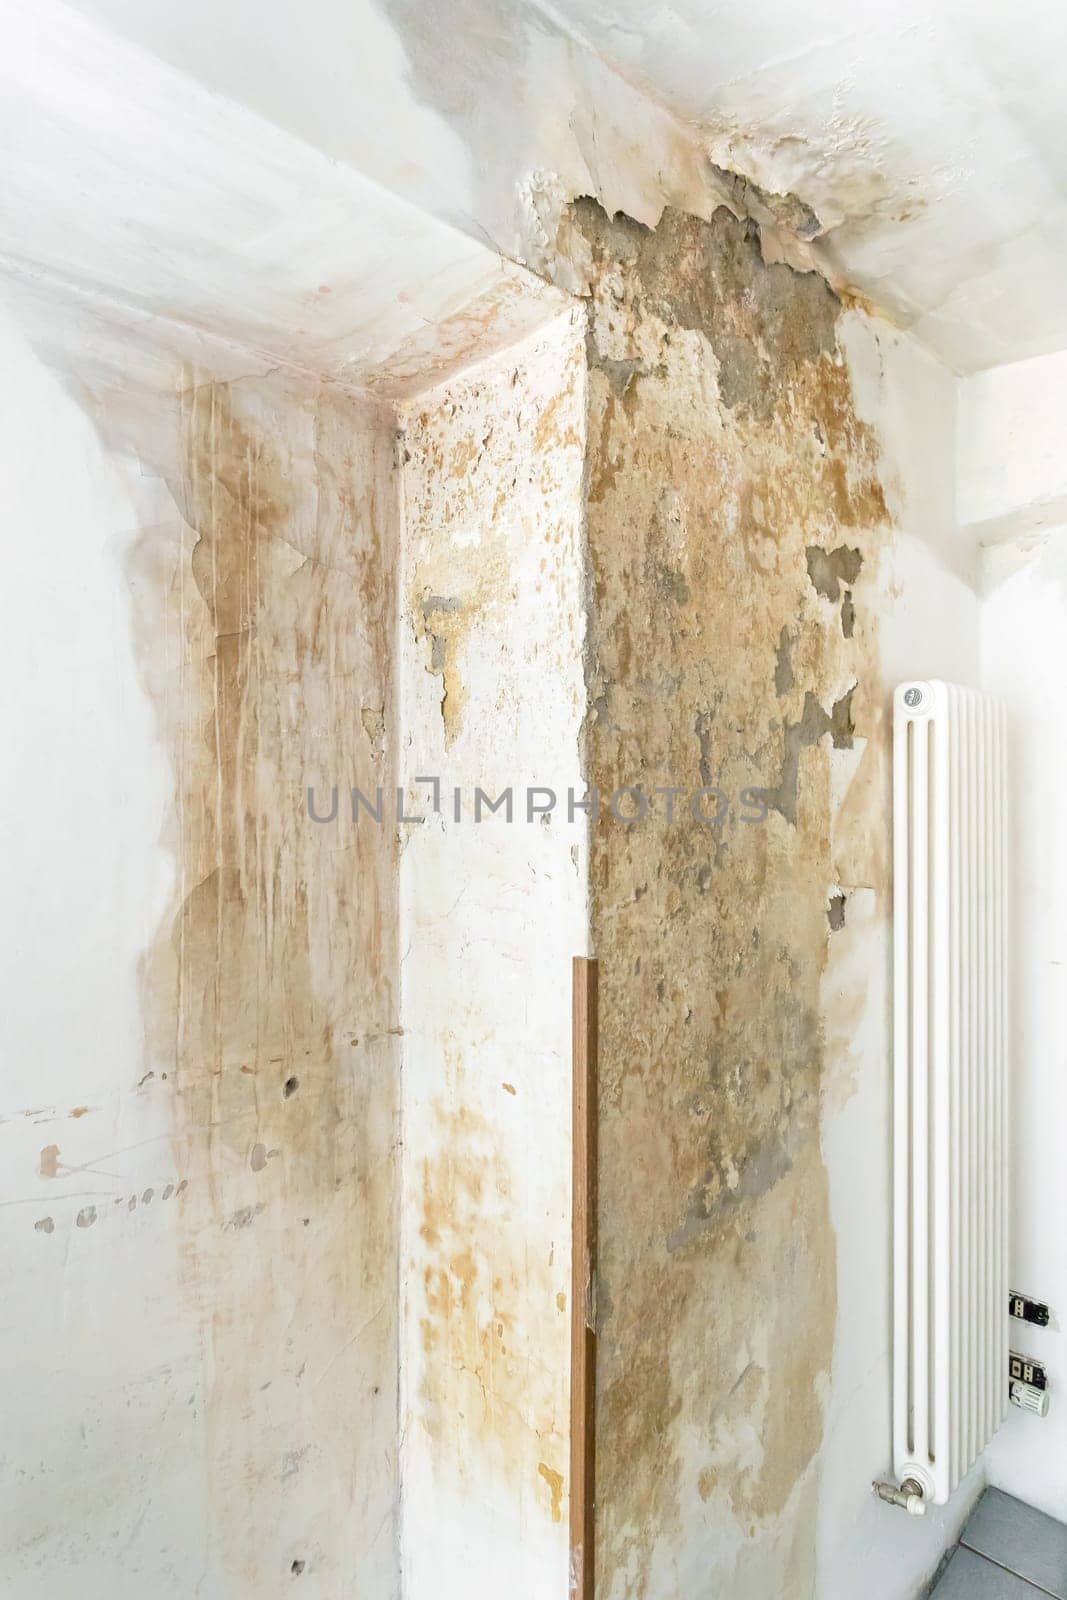 Mold fungus on ceiling and wall by germanopoli